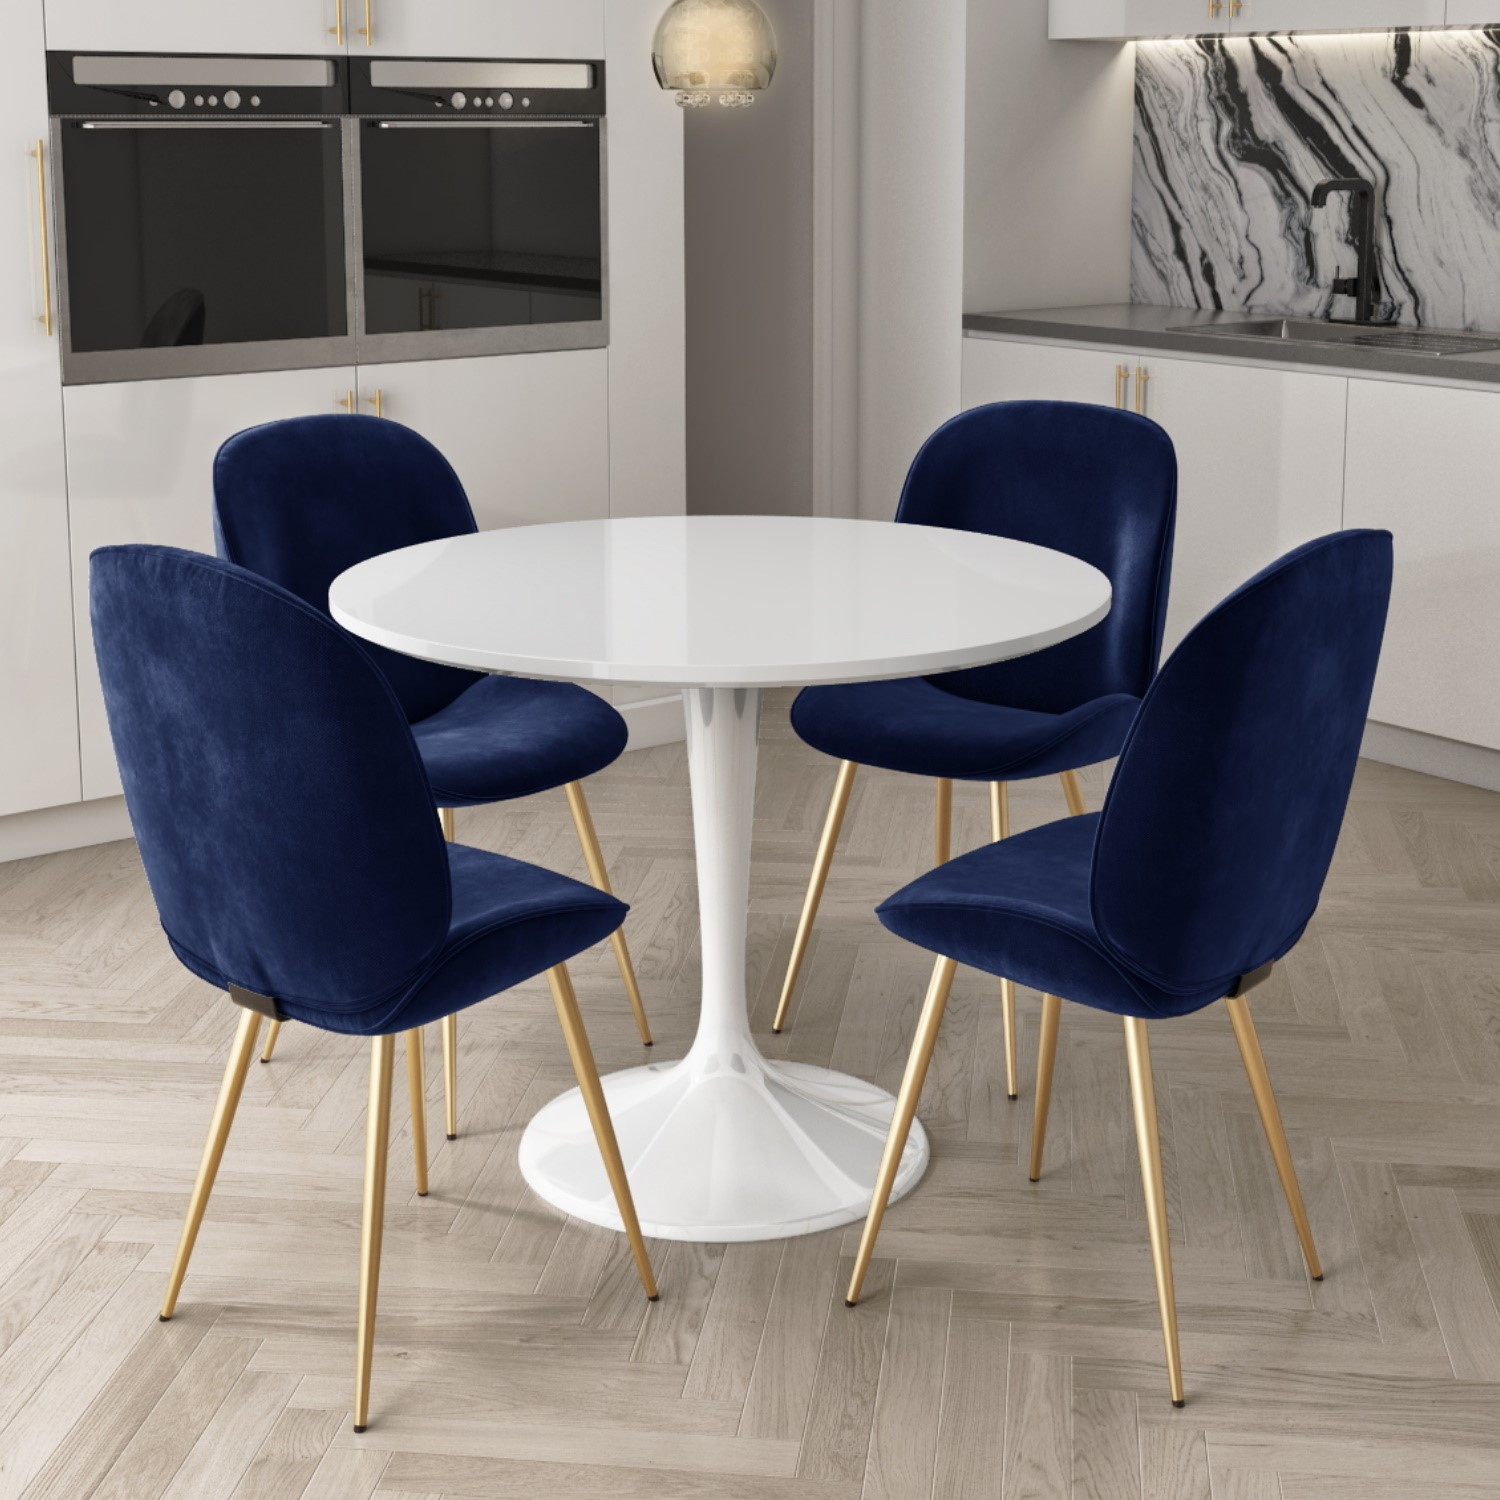 White Round High Gloss Dining Table With 4 Dining Chairs In Navy Blue Velvet Furniture123